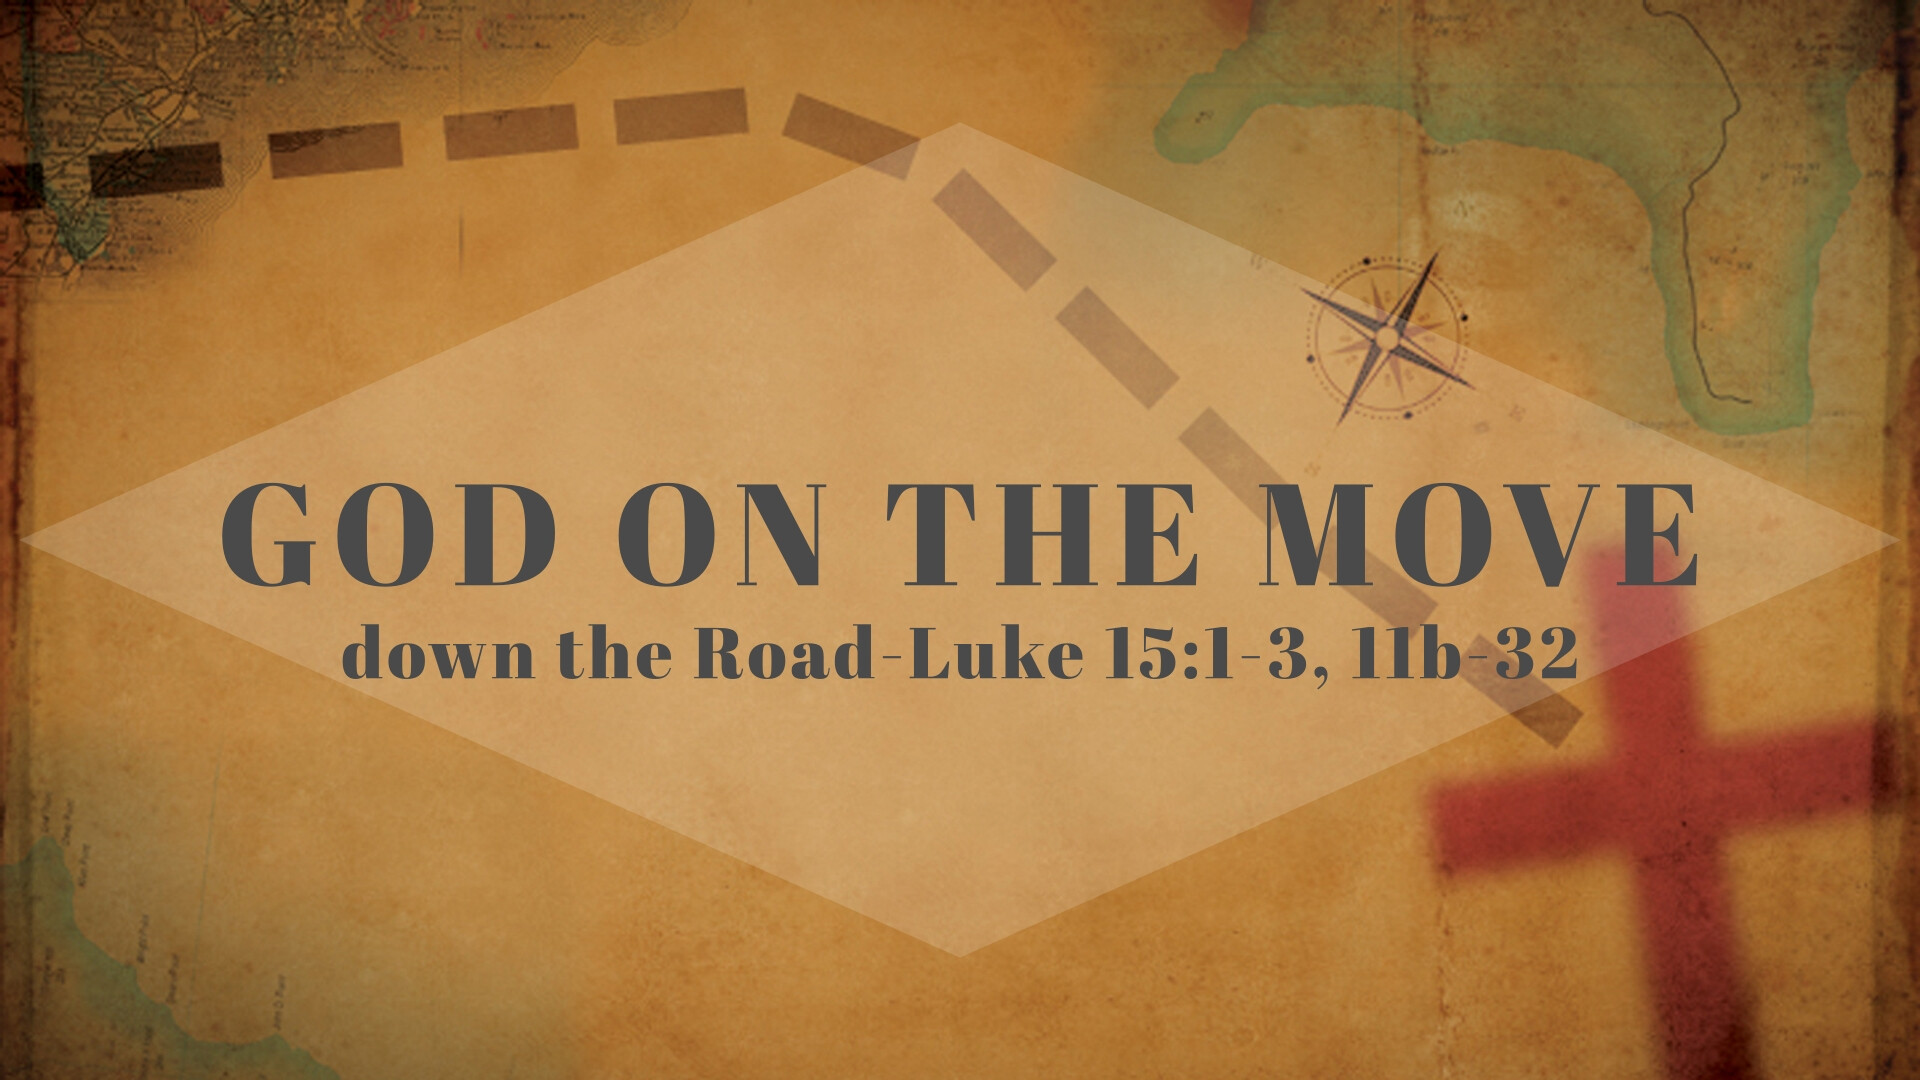 God on the Move: down the Road